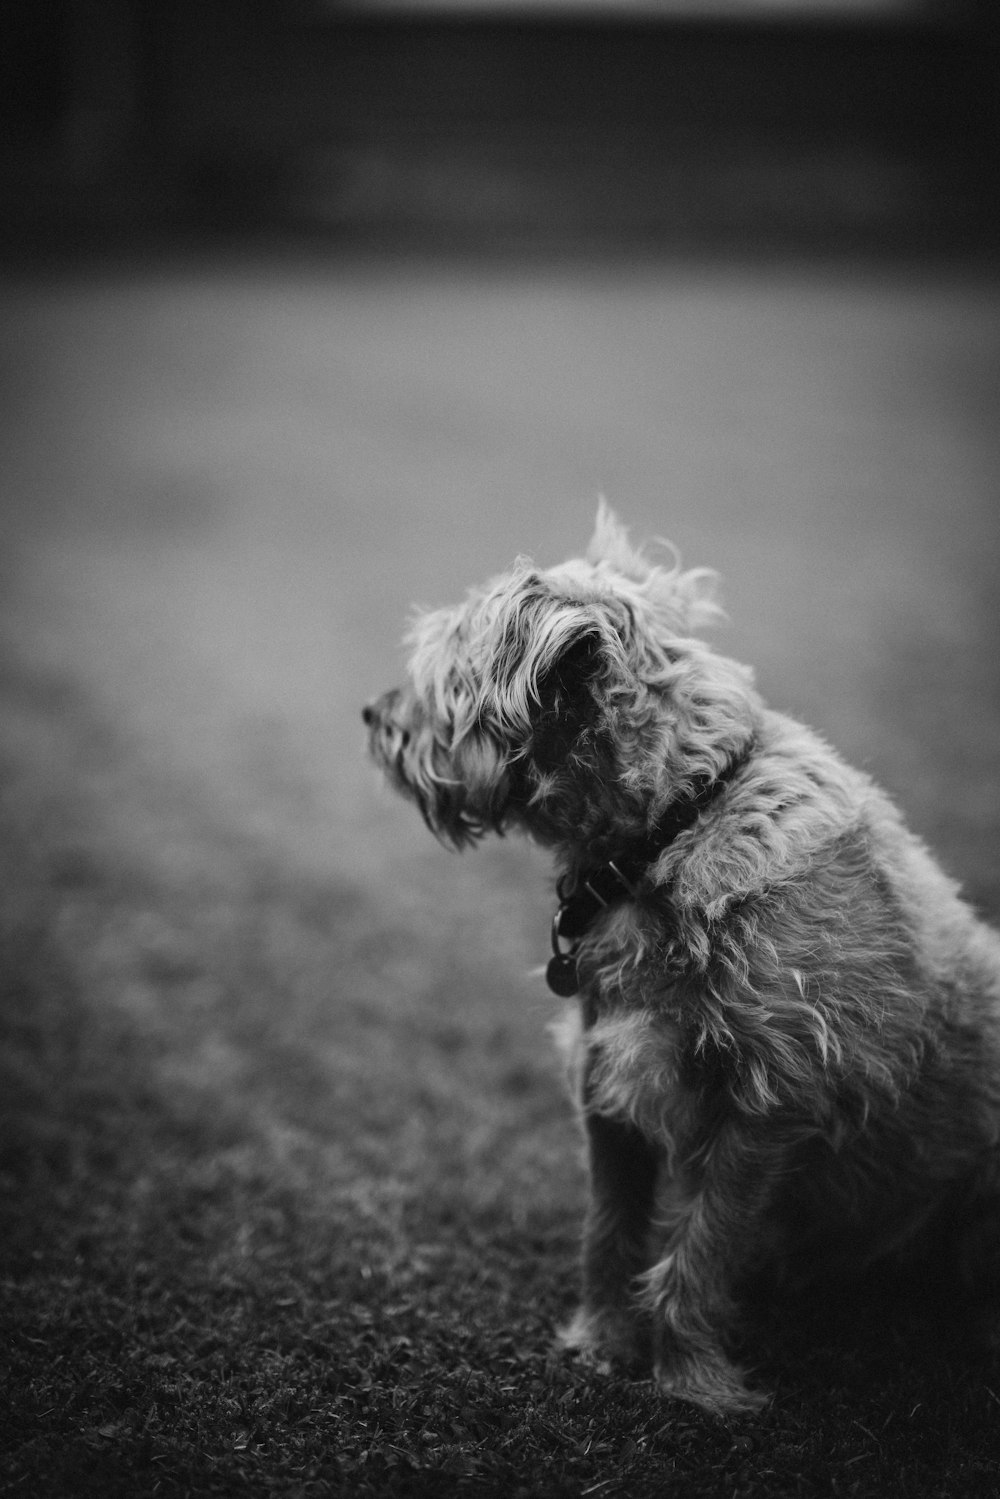 grayscale photography of dog sitting on ground